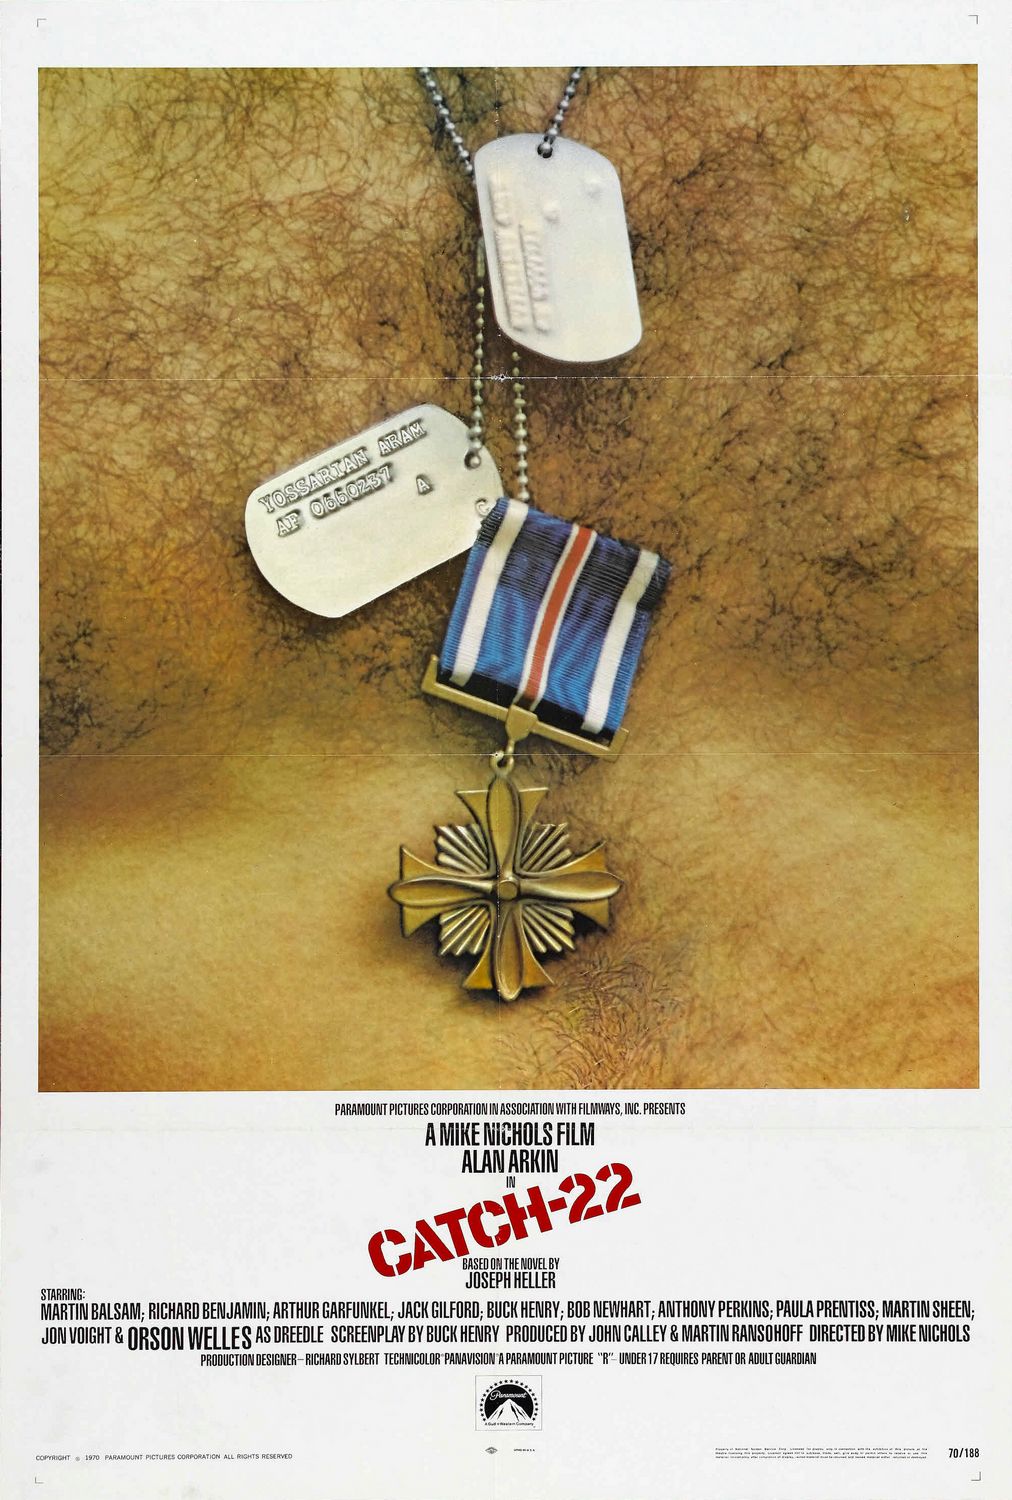 Extra Large Movie Poster Image for Catch-22 